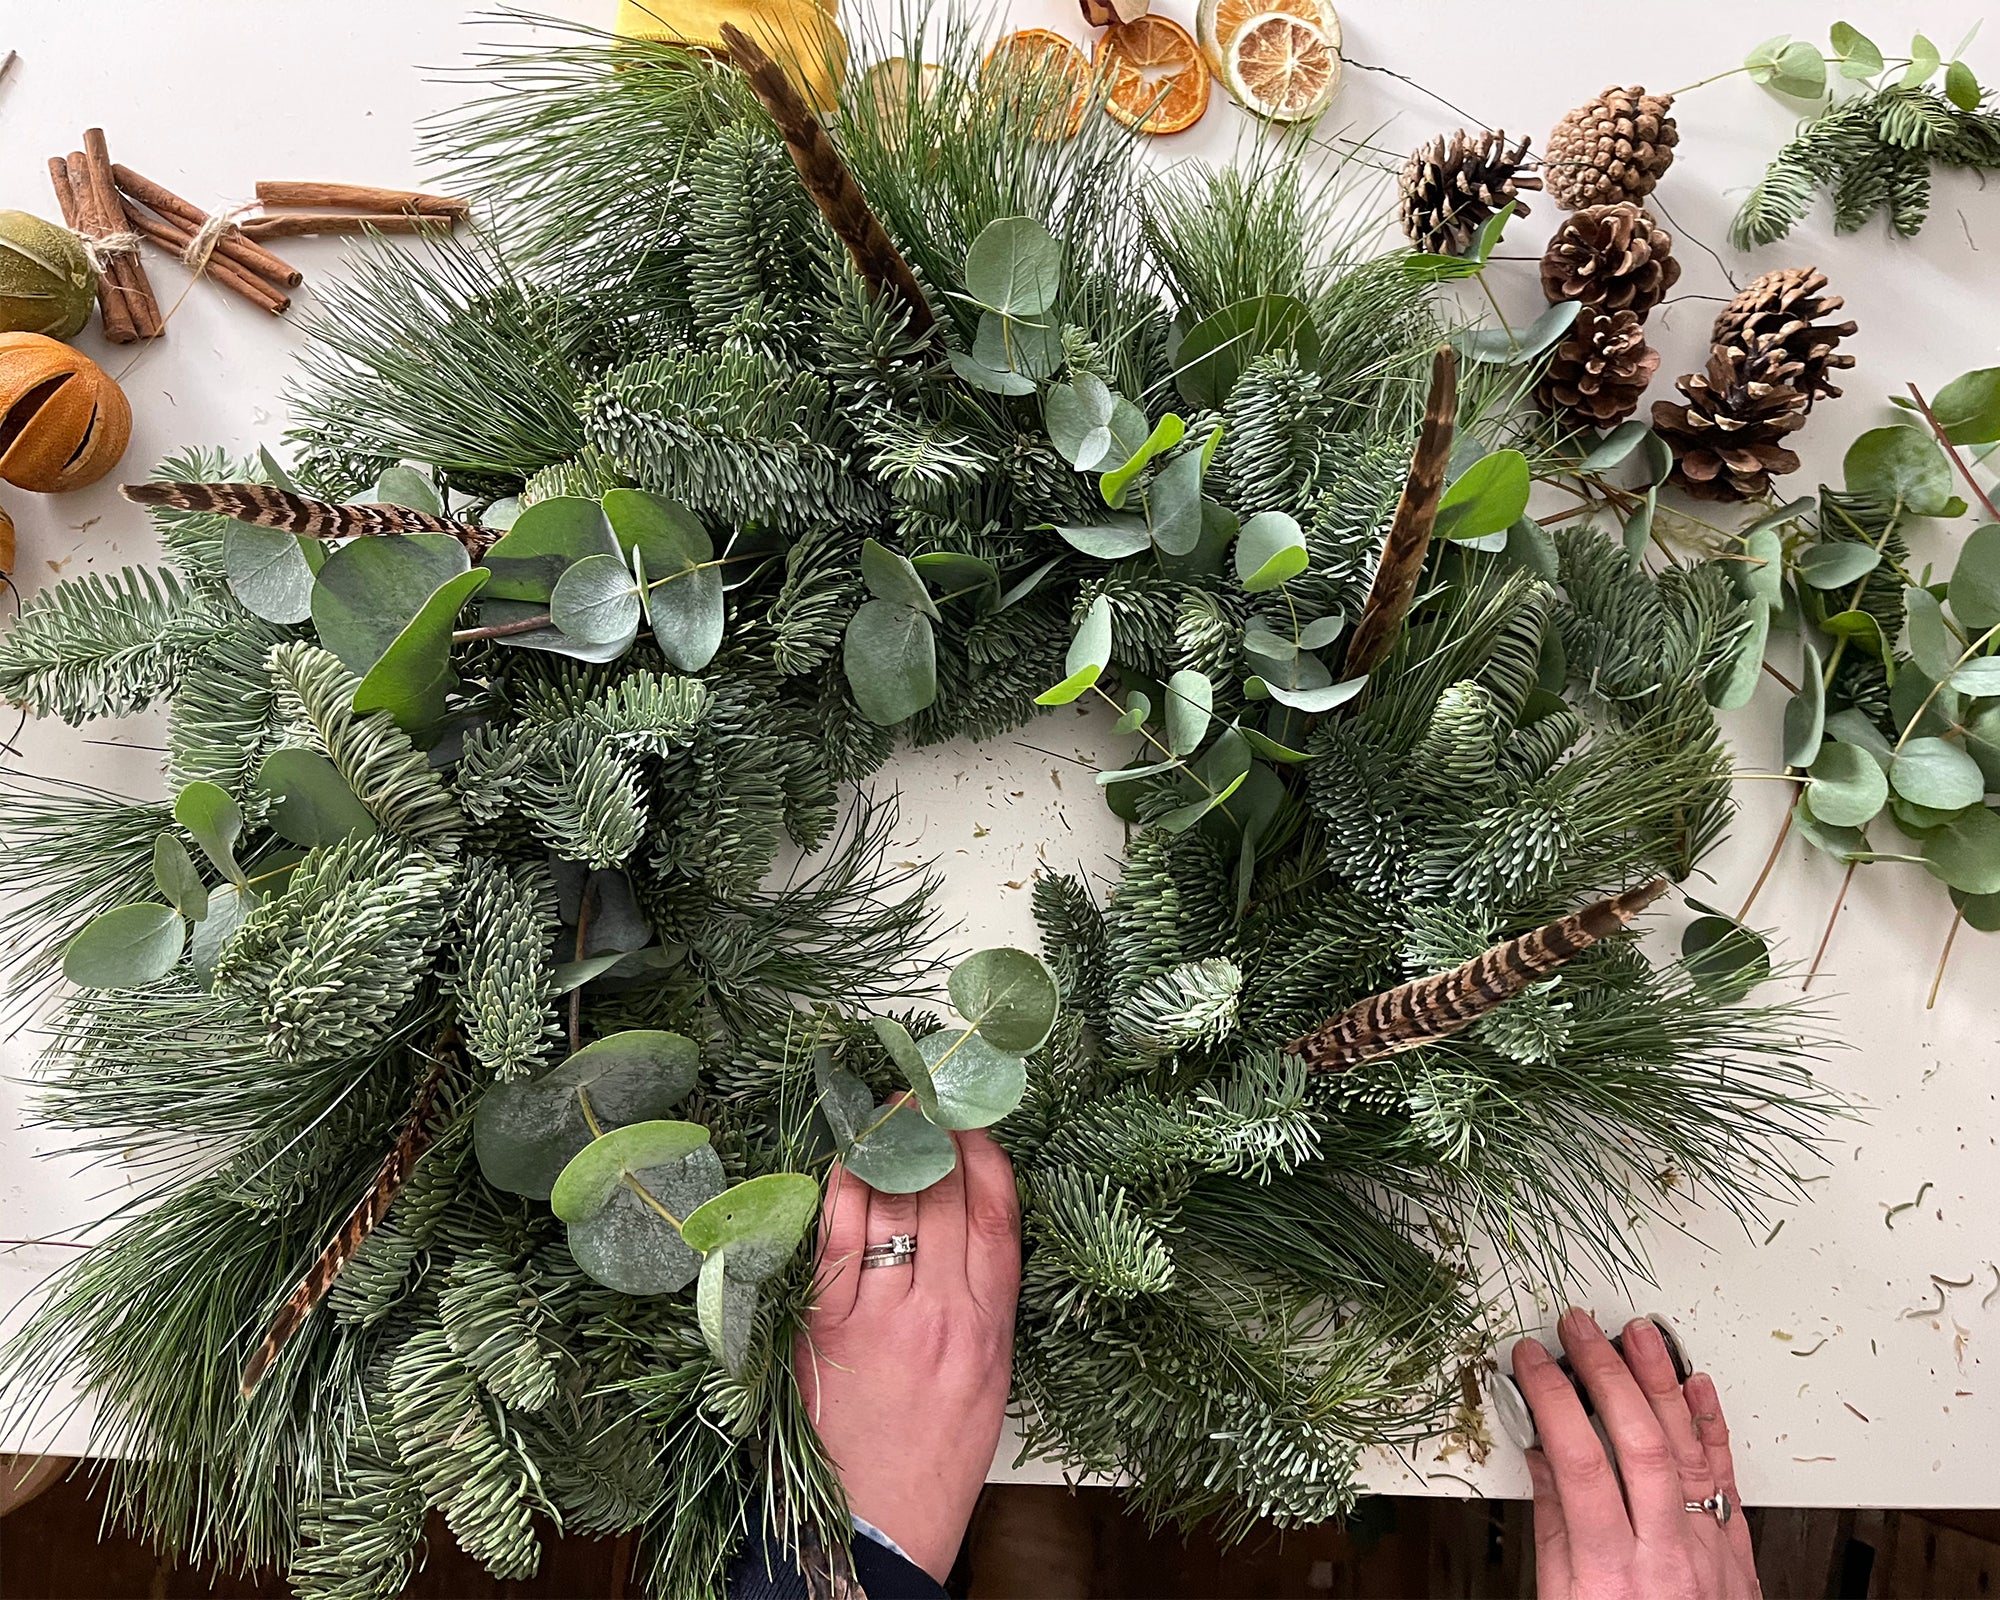 How To Make A Christmas Wreath by Sophie Allport